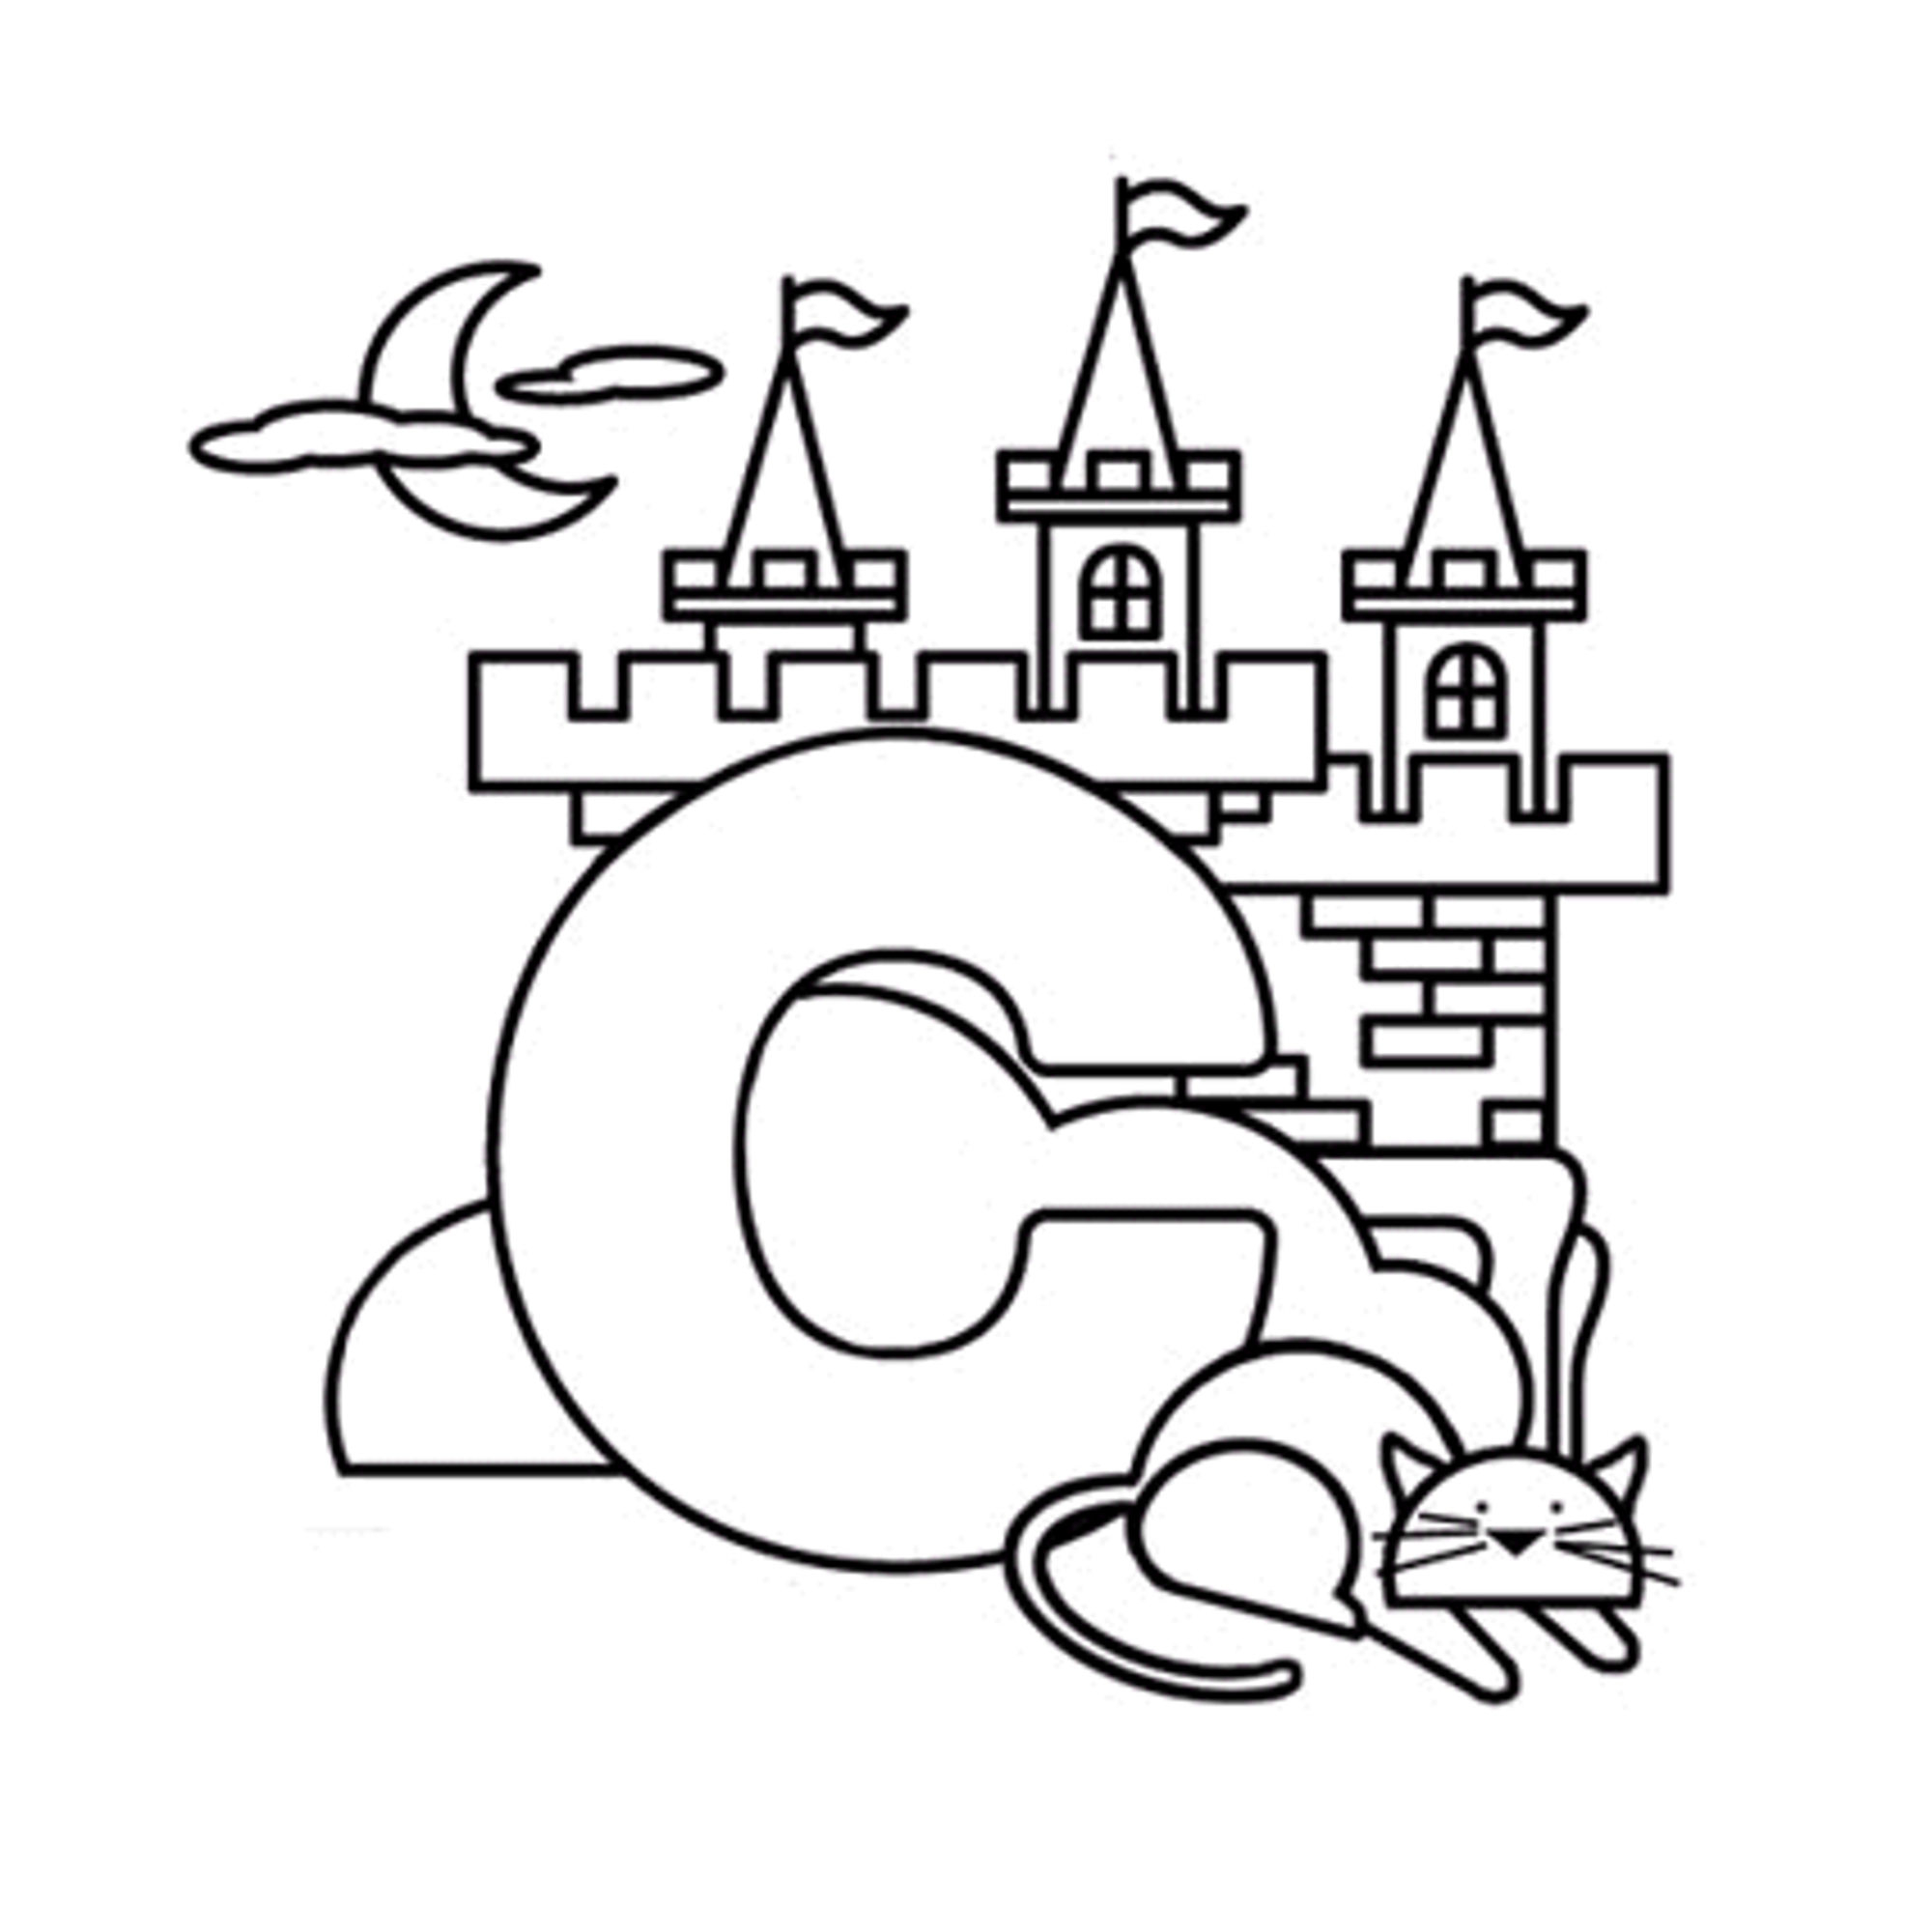 Letter C Coloring Pages For Preschoolers Letter C Worksheet For Toddlers Letter C Cake Coloring Page Kids